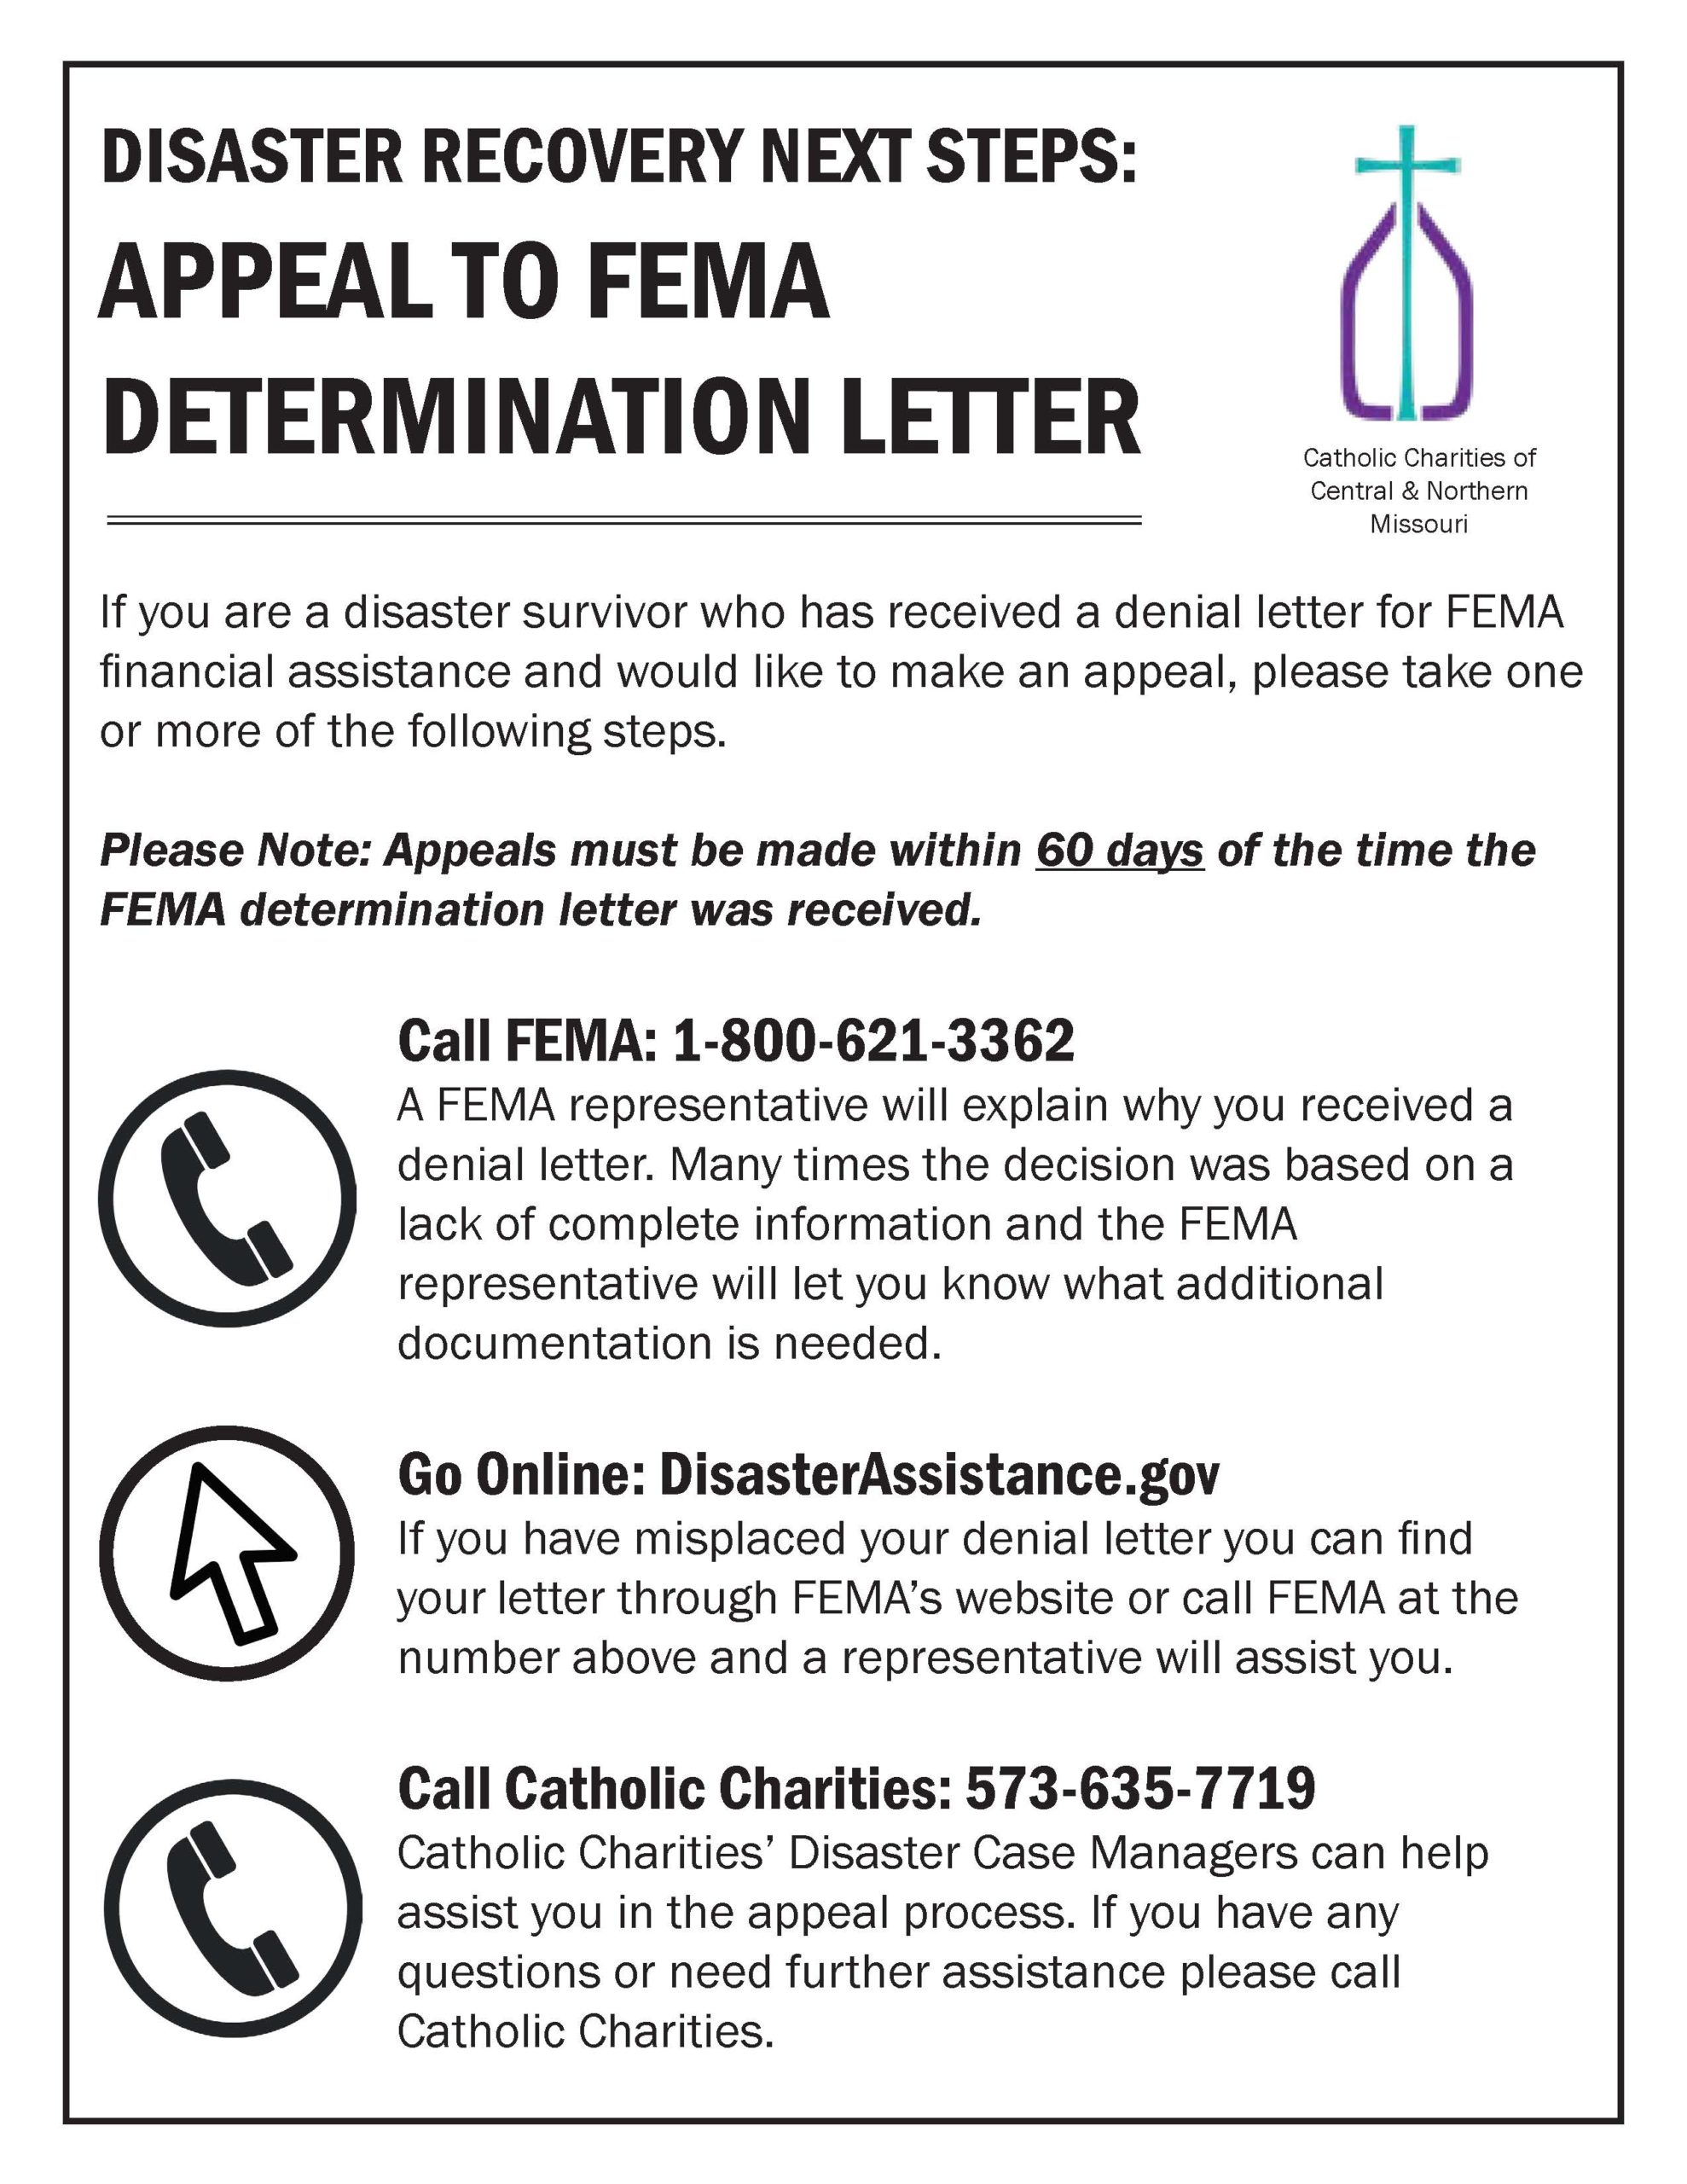 Disaster Recovery Next Steps Appeal FEMA Determination Letter